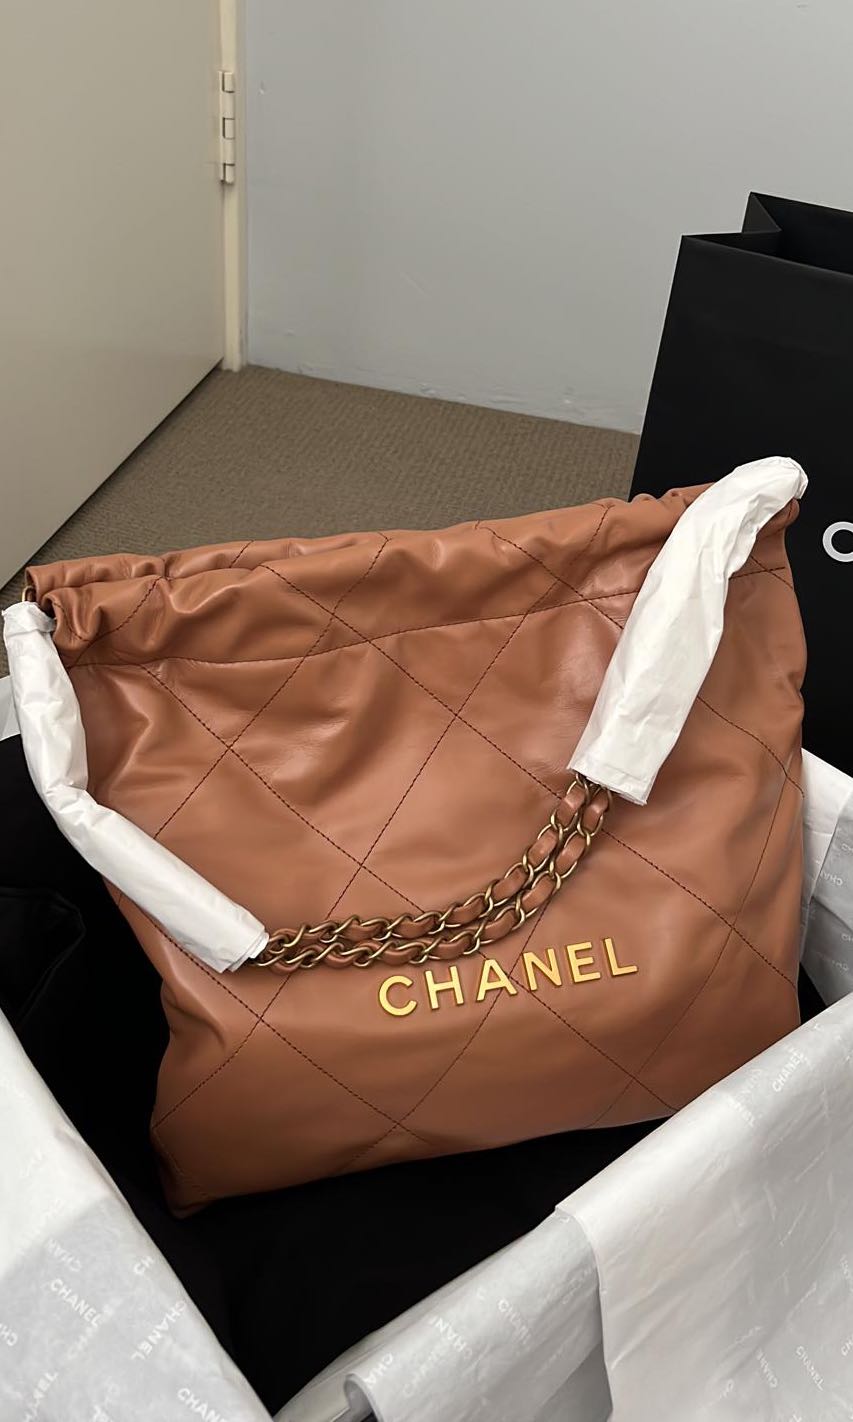 CHANEL, Bags, Bnew 22a Chanel 9 Flap Small Caramel Brown Bag